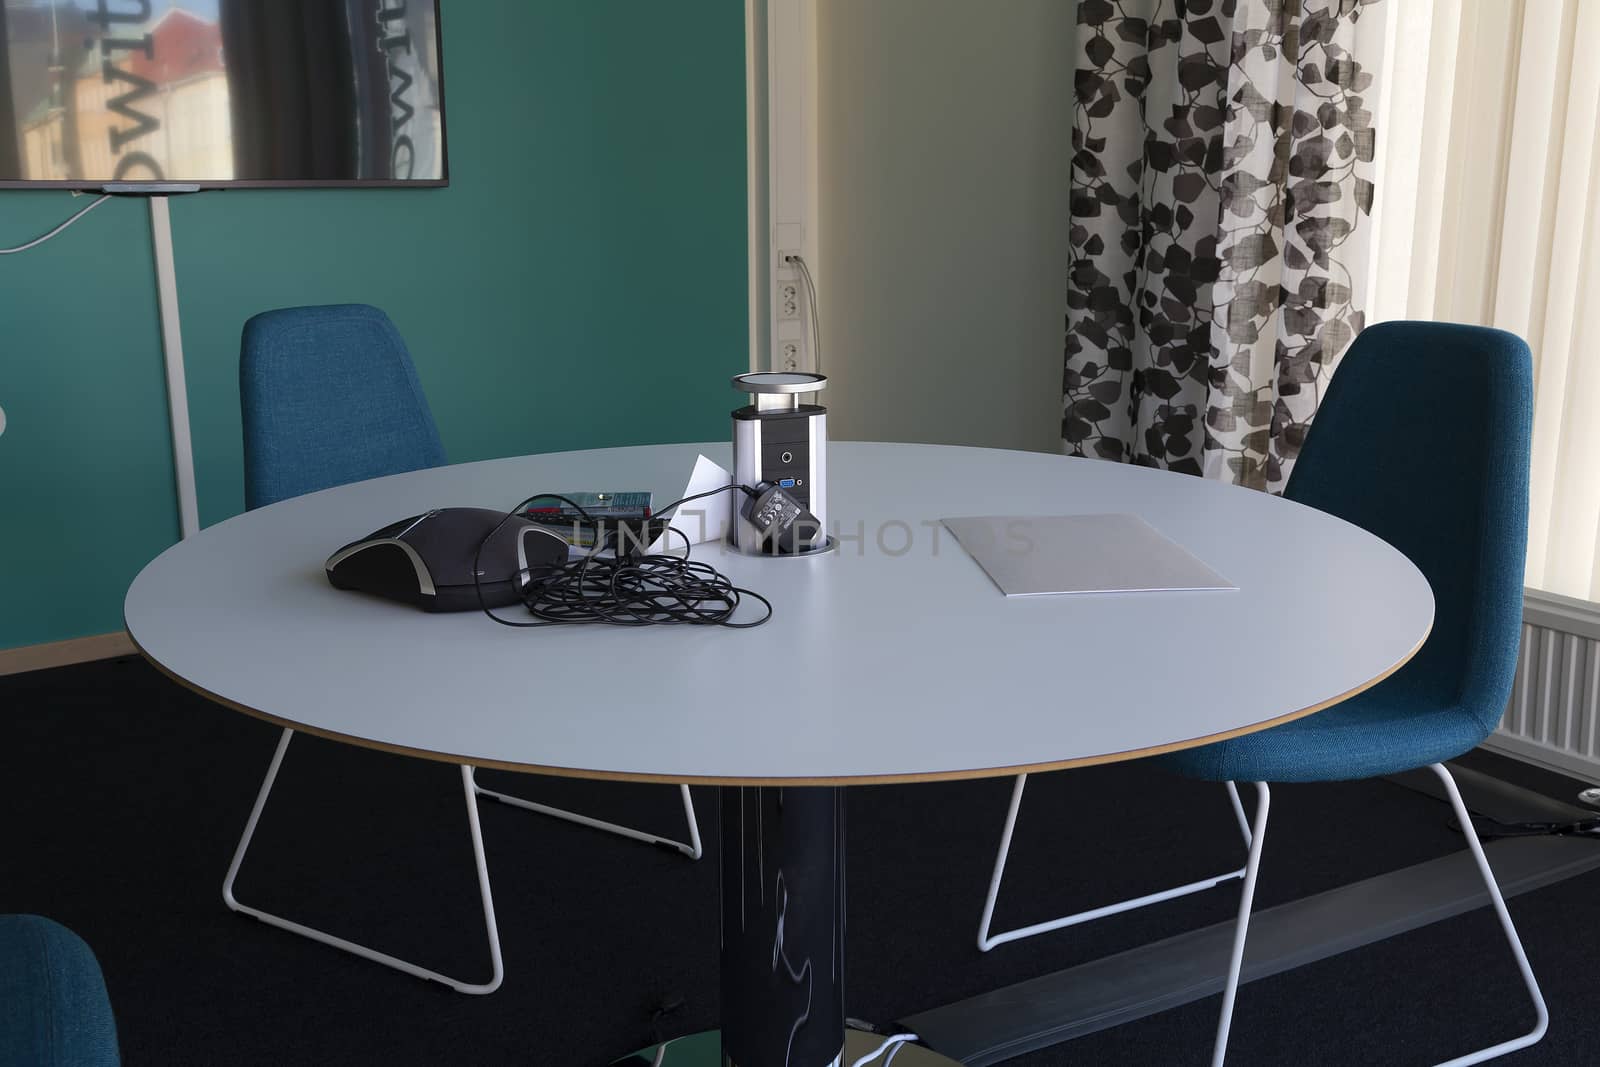 A circular litttle table at a conference room